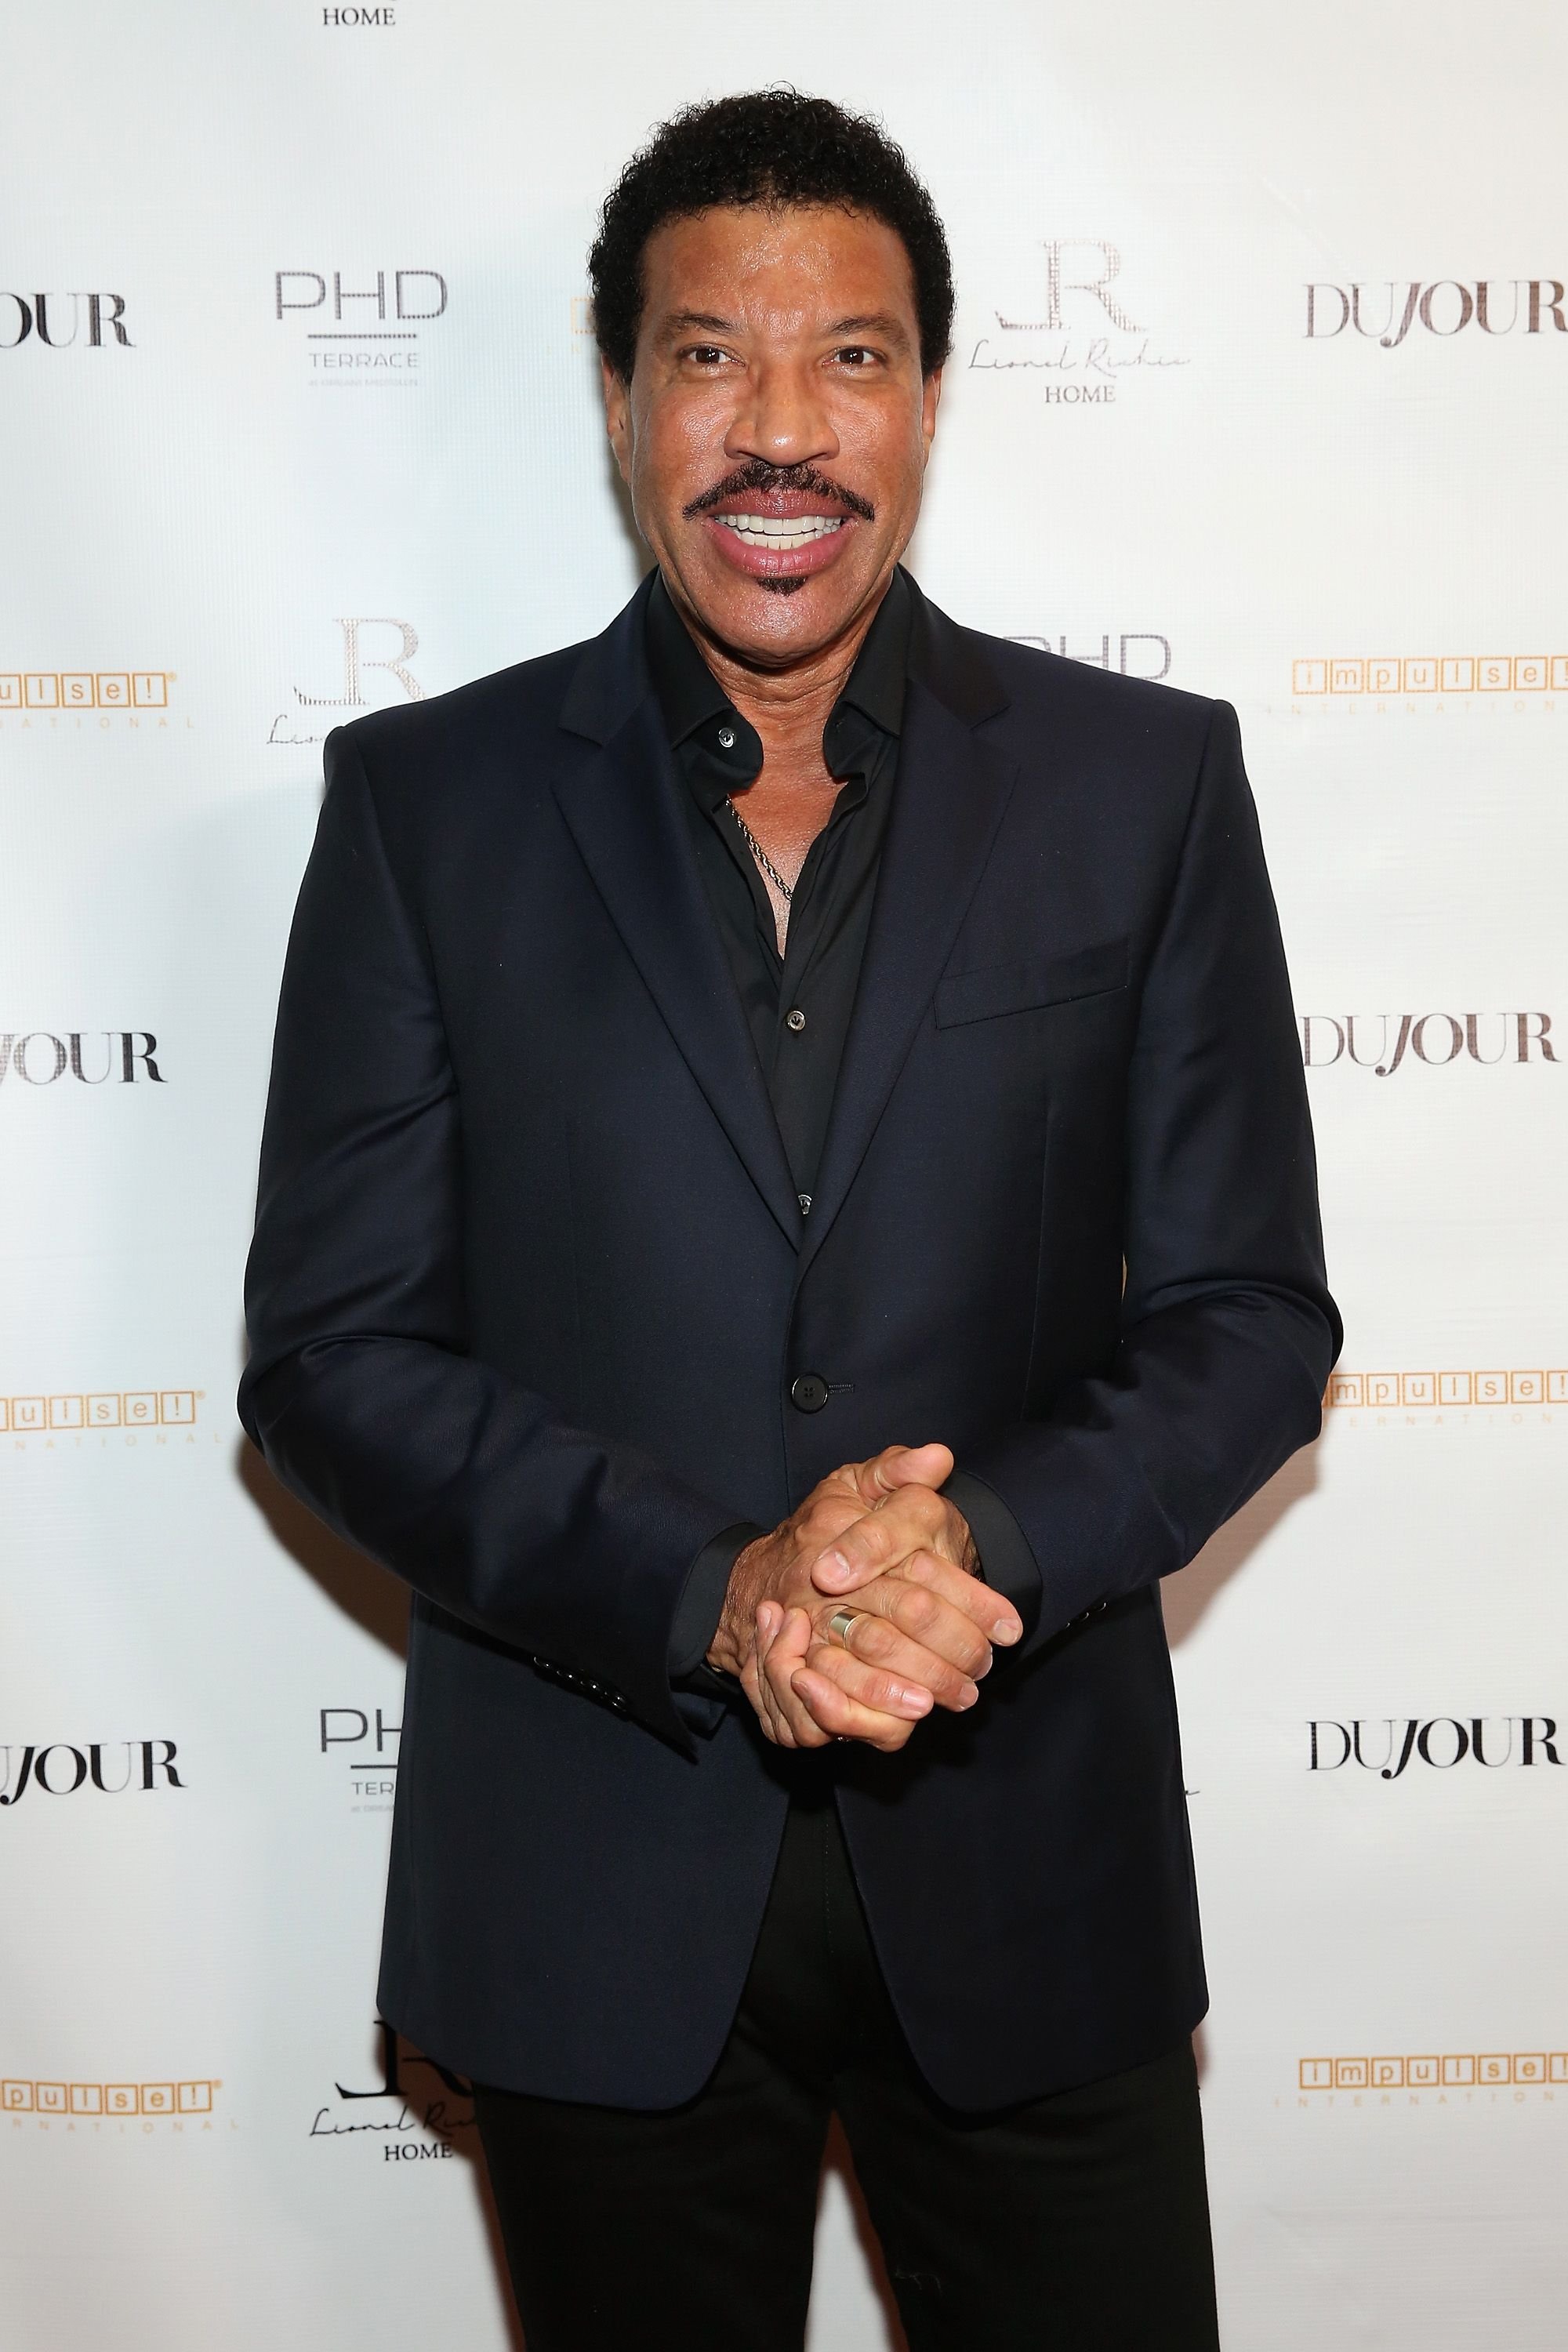 Lionel Richie at Jason Binn's DuJour Magazine and Lionel Richie Home Collection launch on October 27, 2015 | Photo: Getty Images